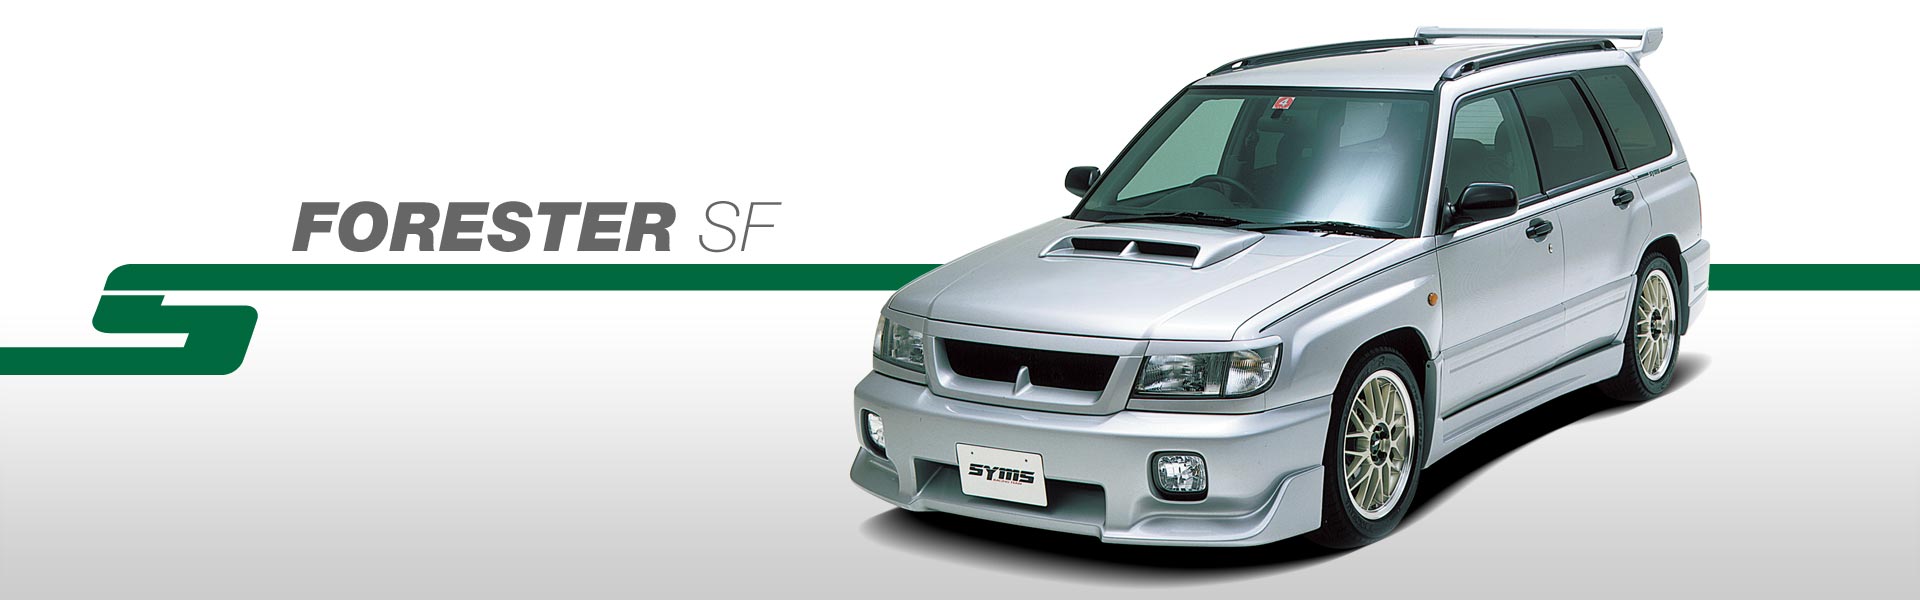 FORESTER - SF